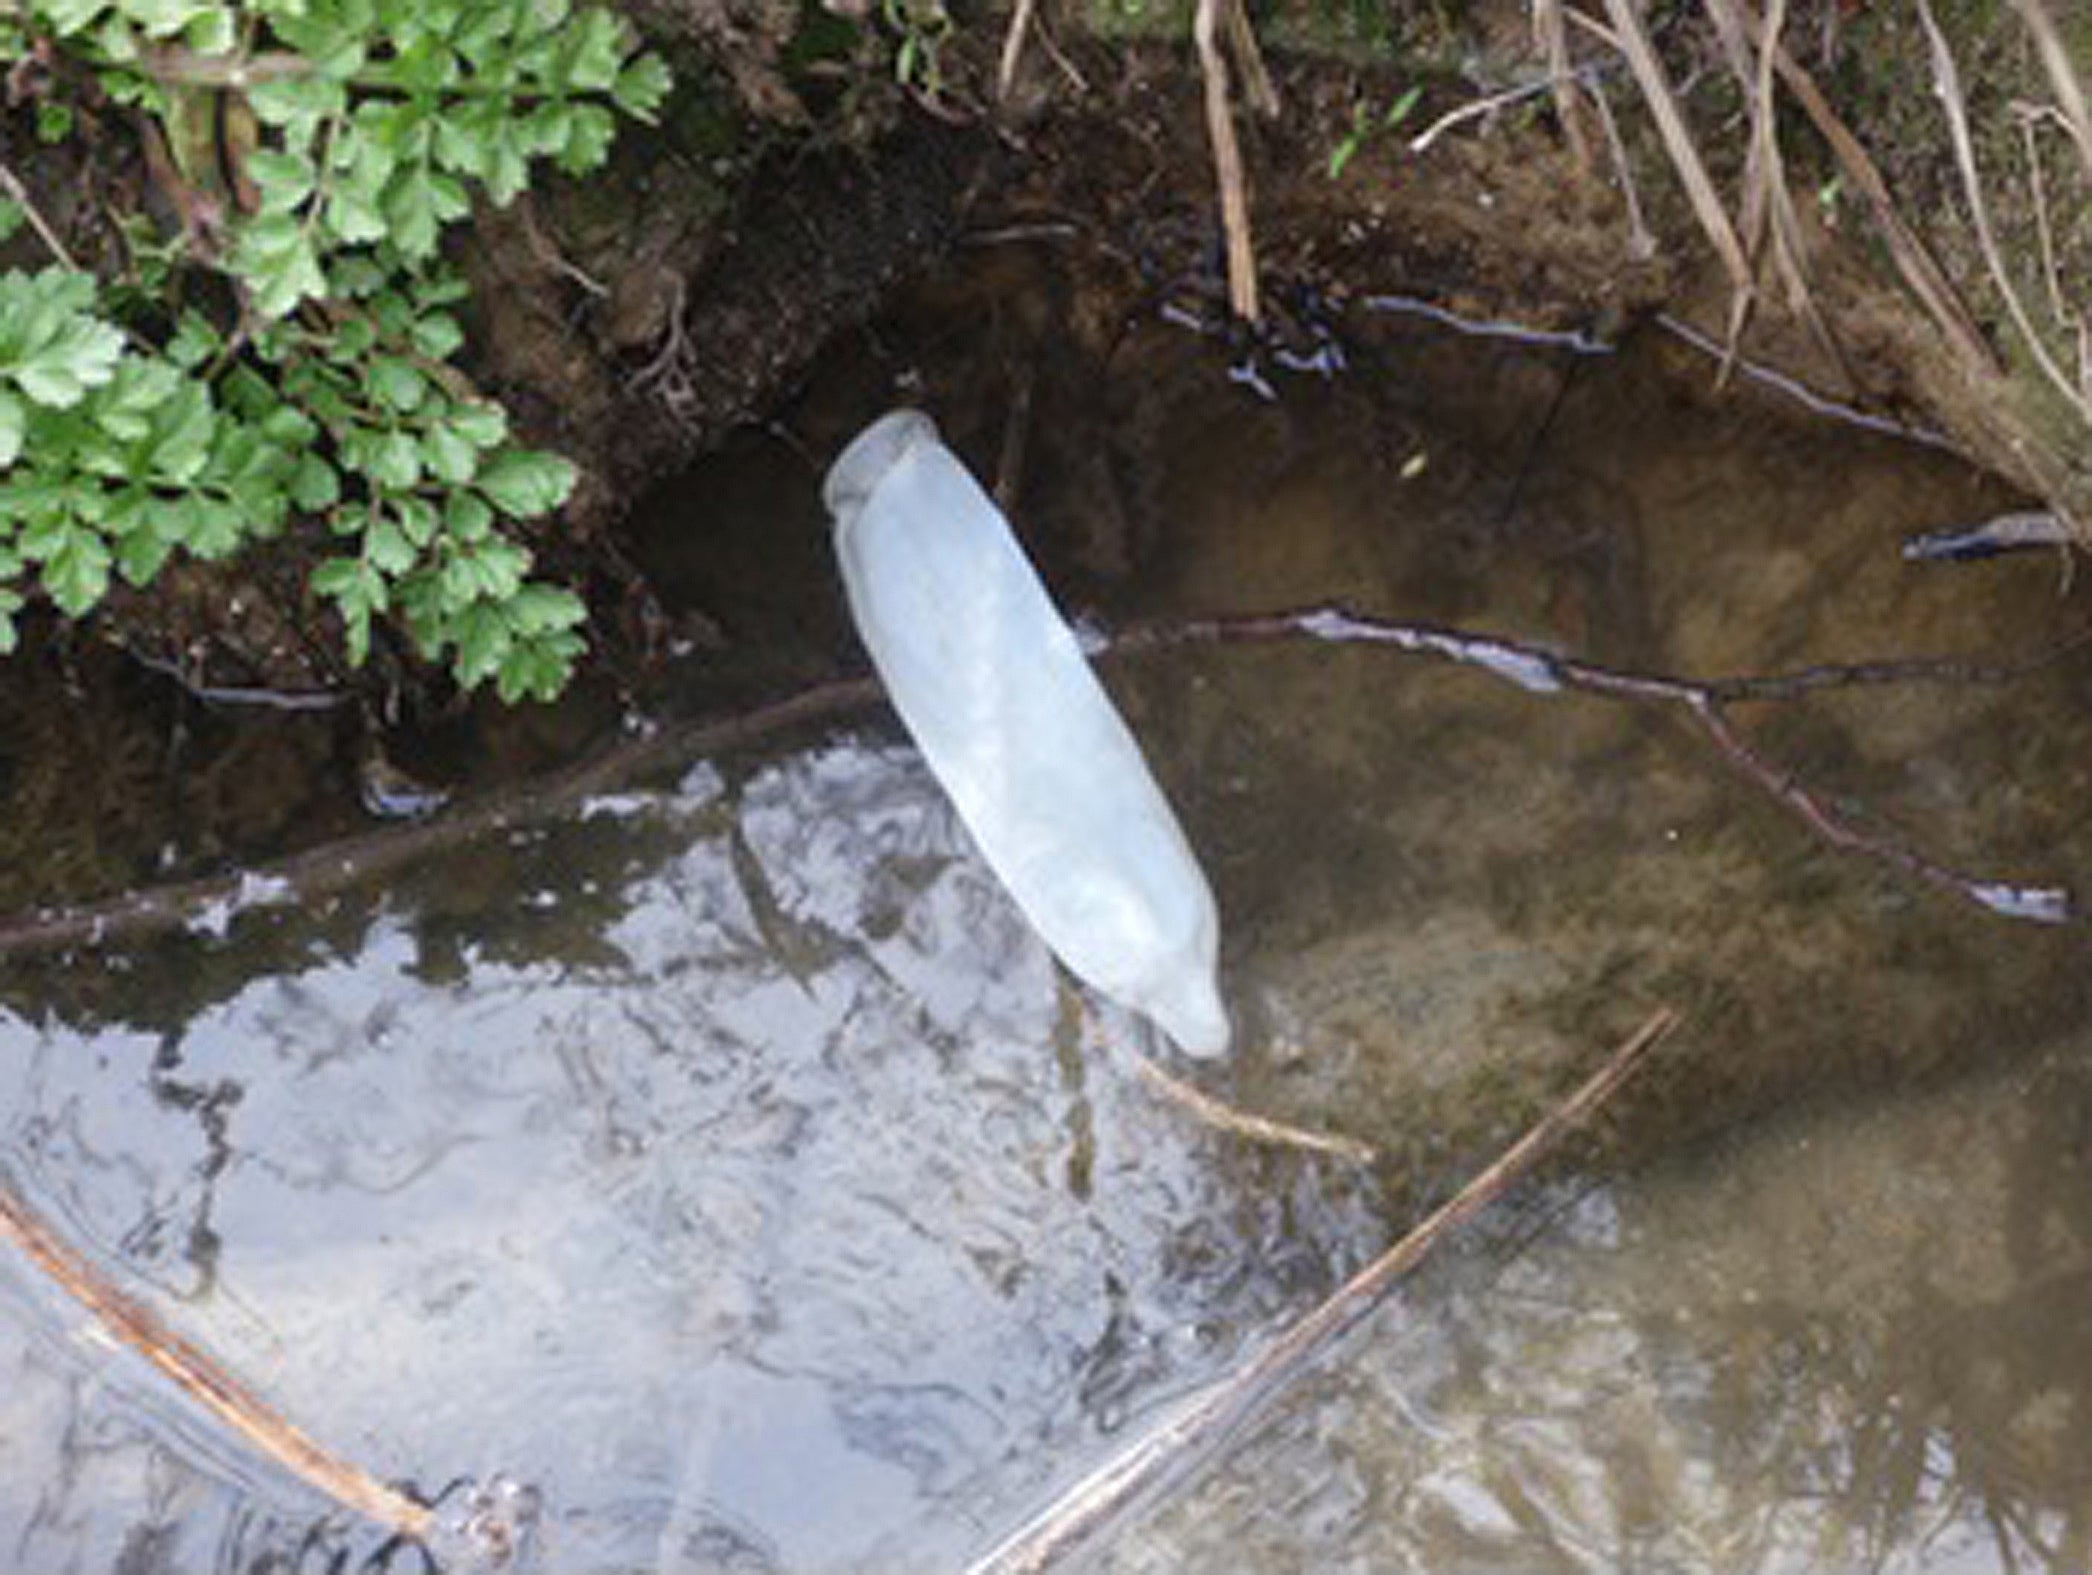 Thames Water has previously been fined ?32.4 million for sewage spills